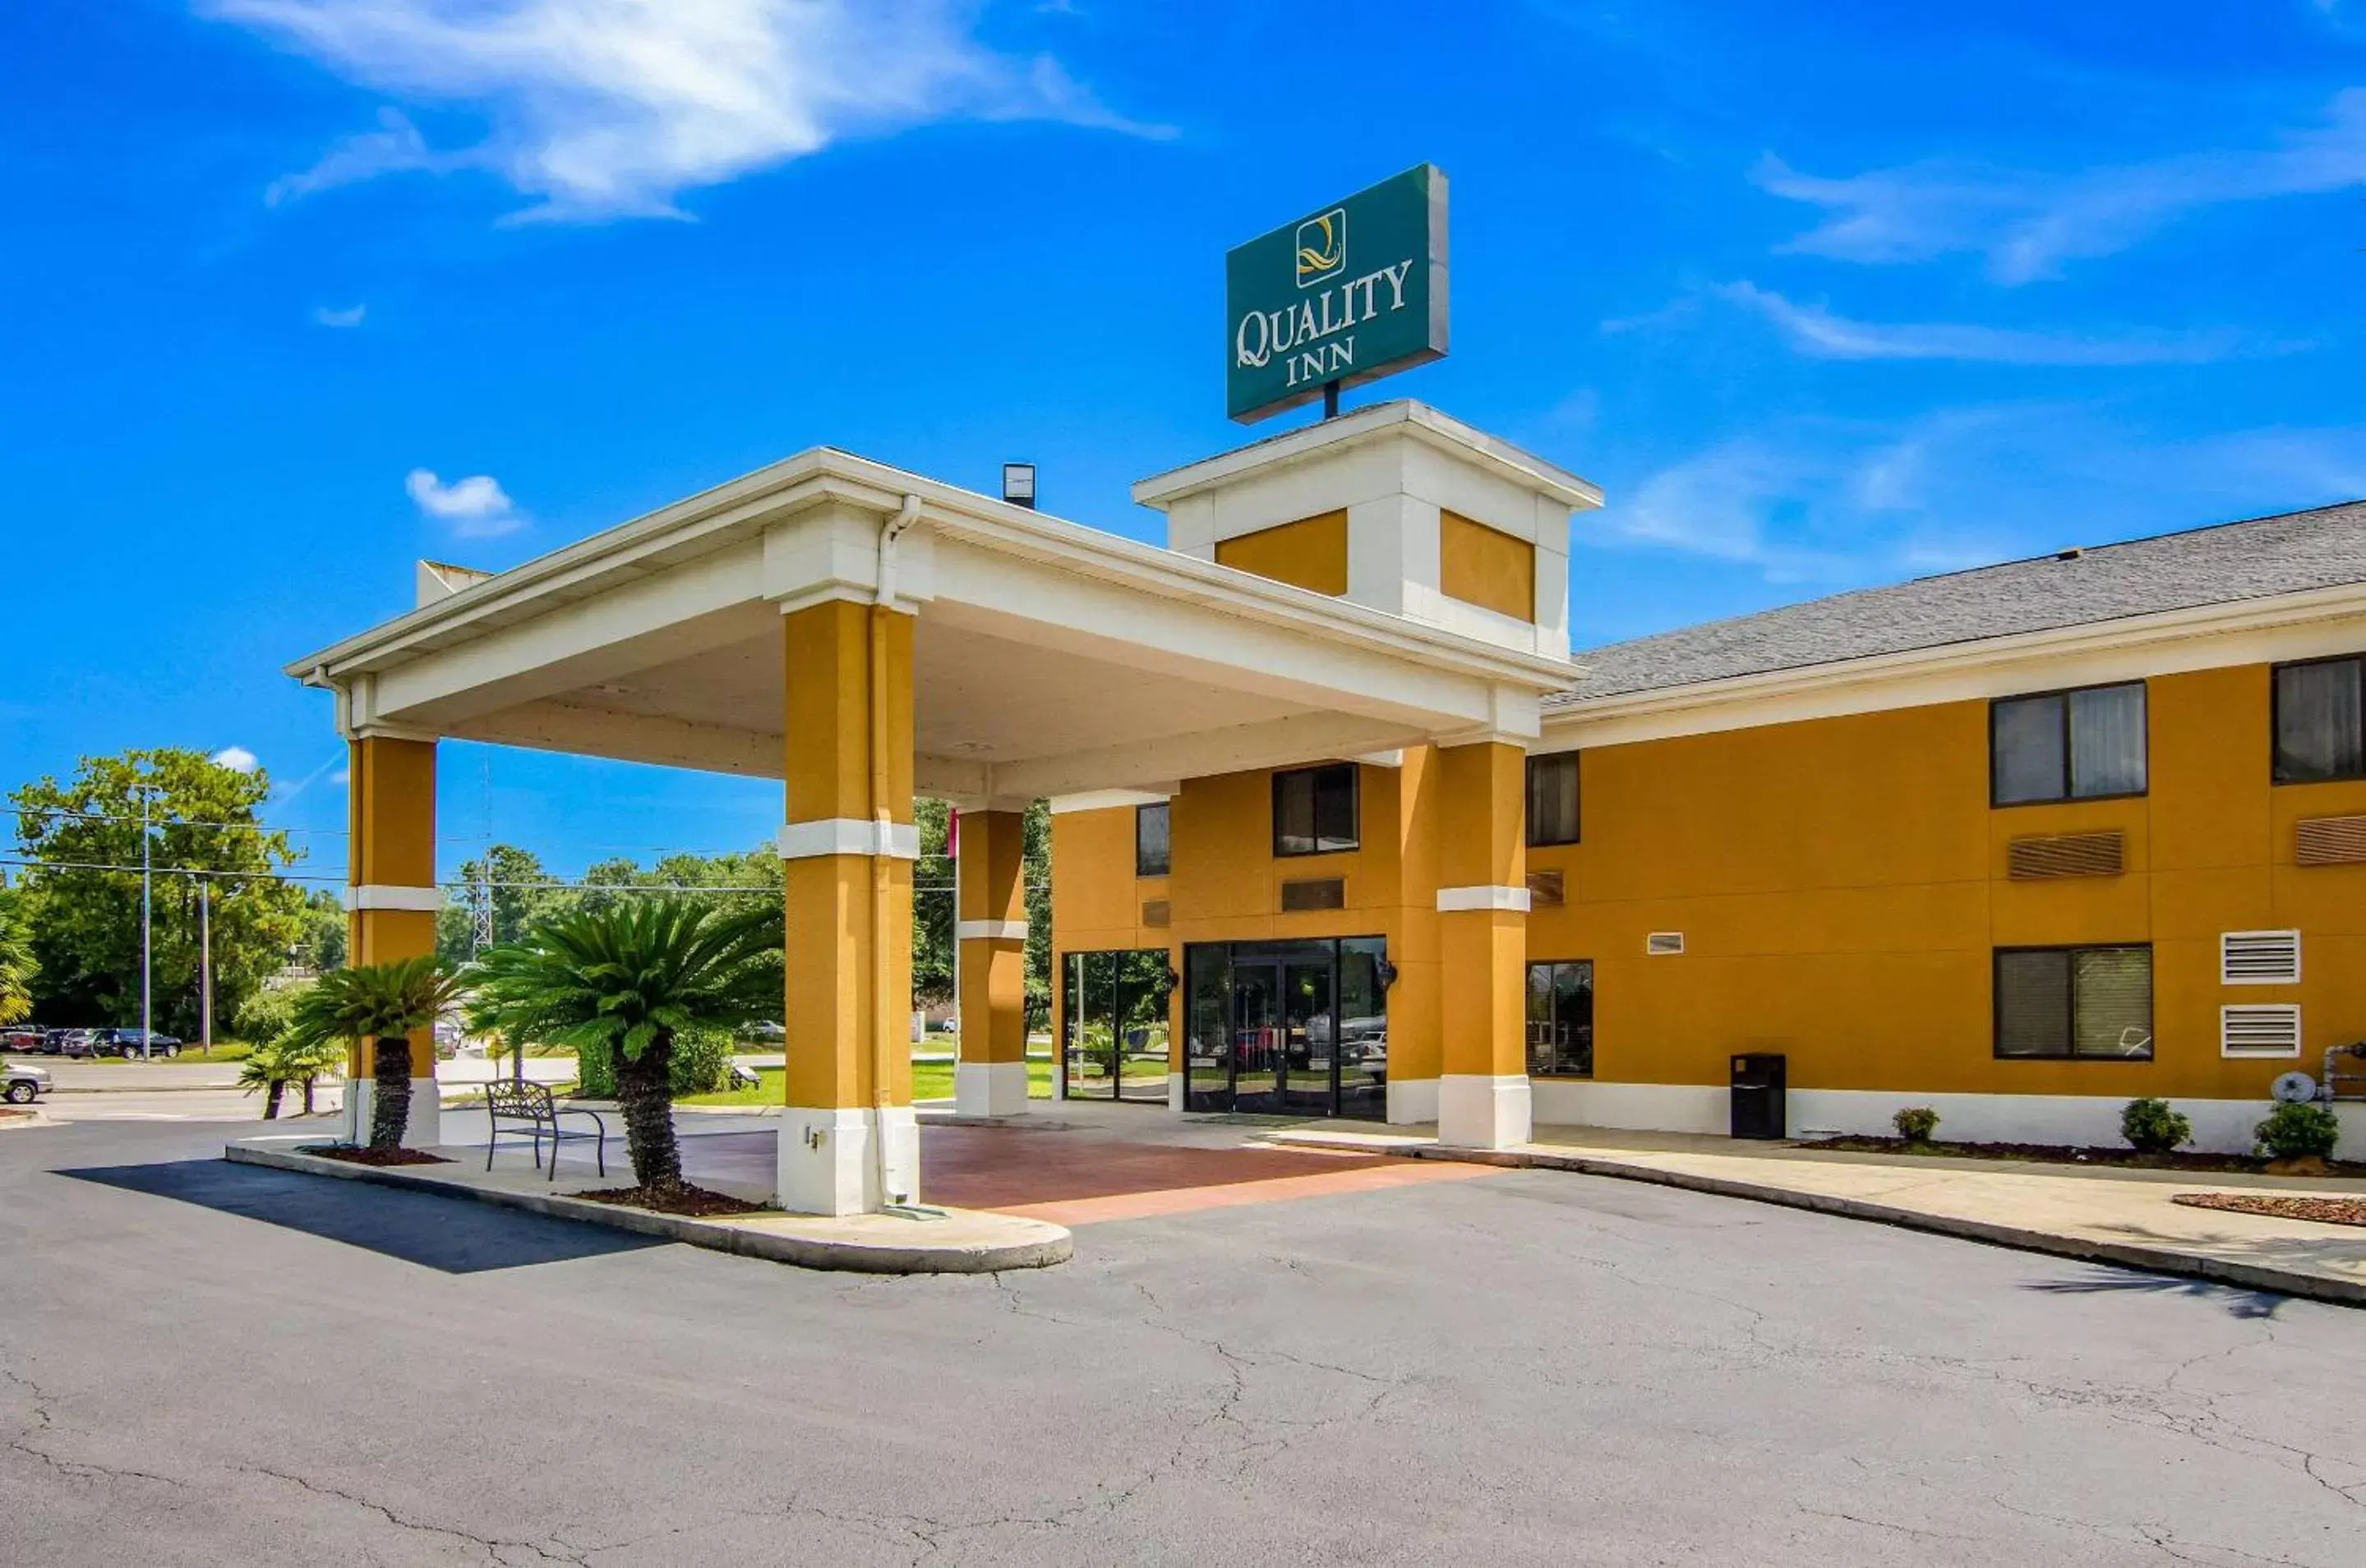 Property Building in Quality Inn Saraland